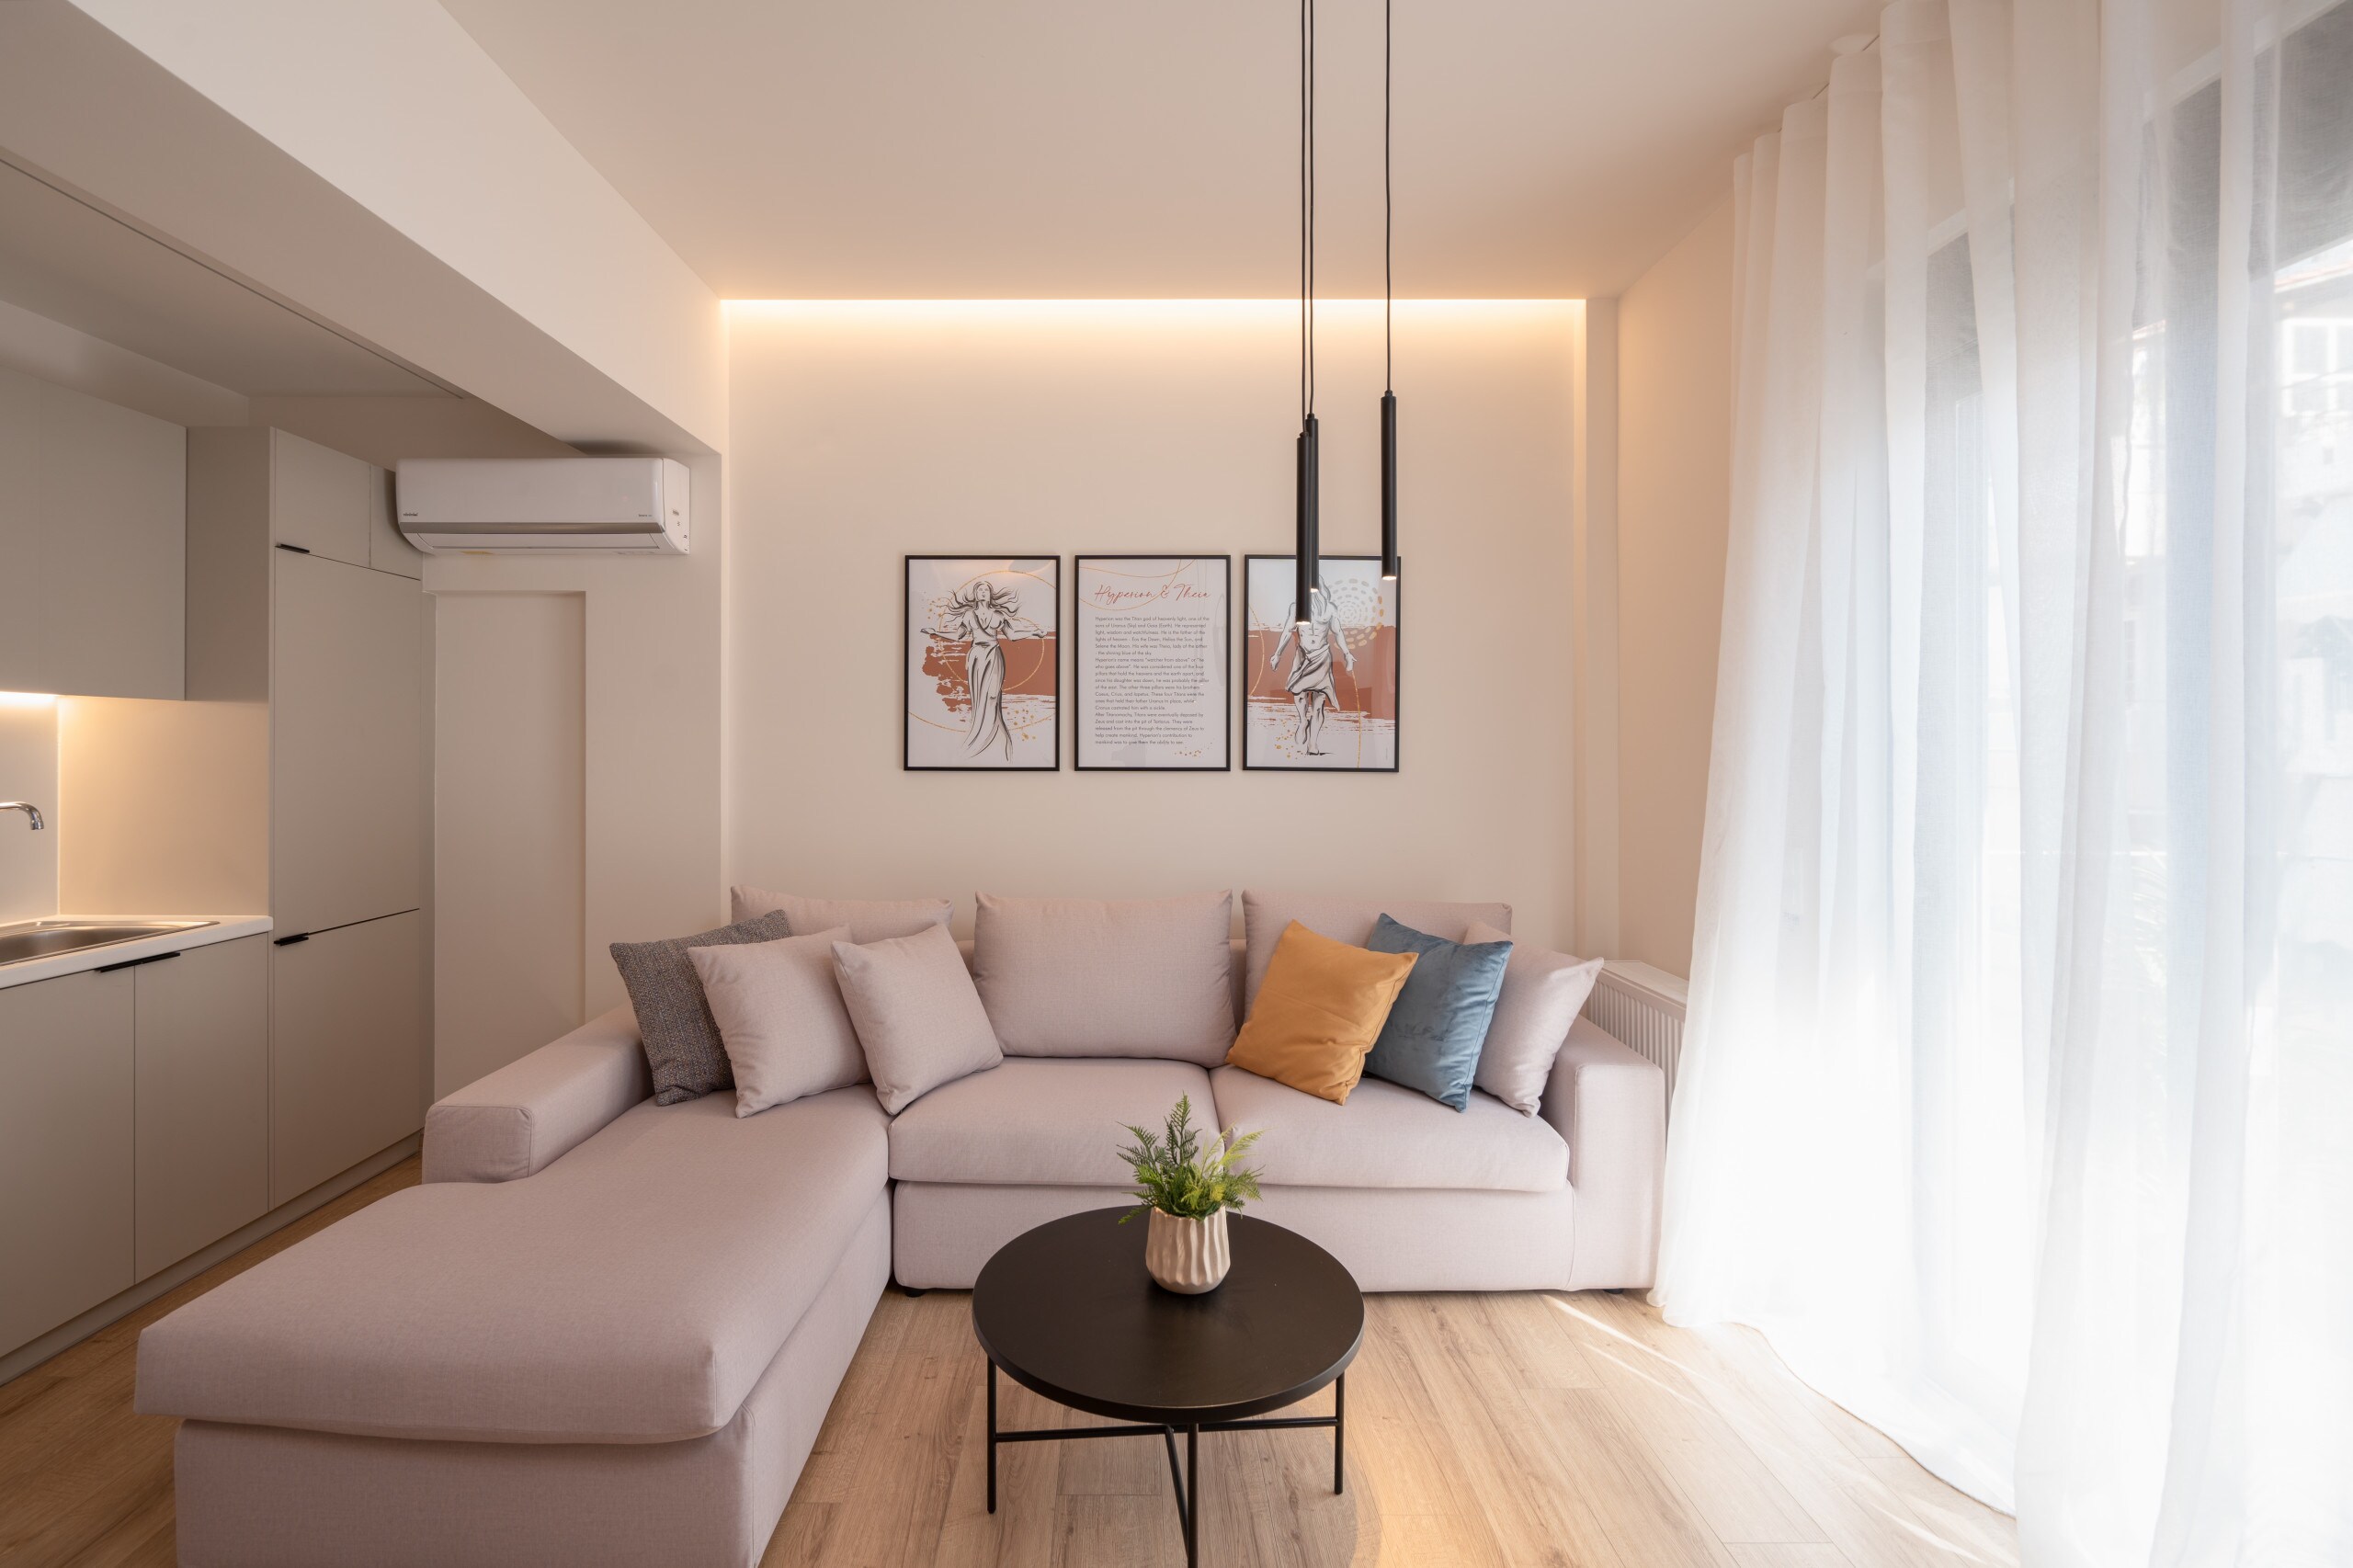 This light-filled, tastefully designed living room awaits every time you return to your base after a day’s worth of adventures in Athens